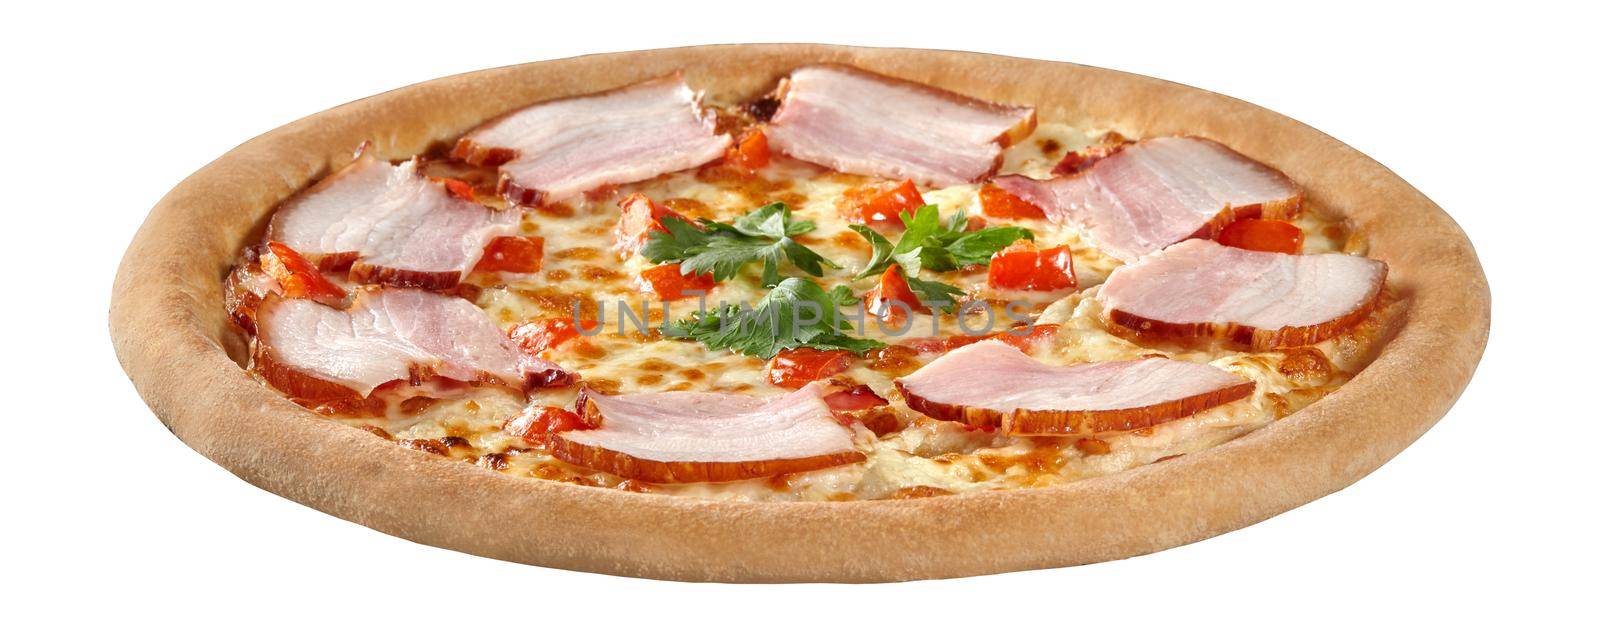 Closeup of freshly baked pizza with cream cheese sauce, smoked bacon slices and tomatoes garnished with fresh fragrant greens isolated on white background